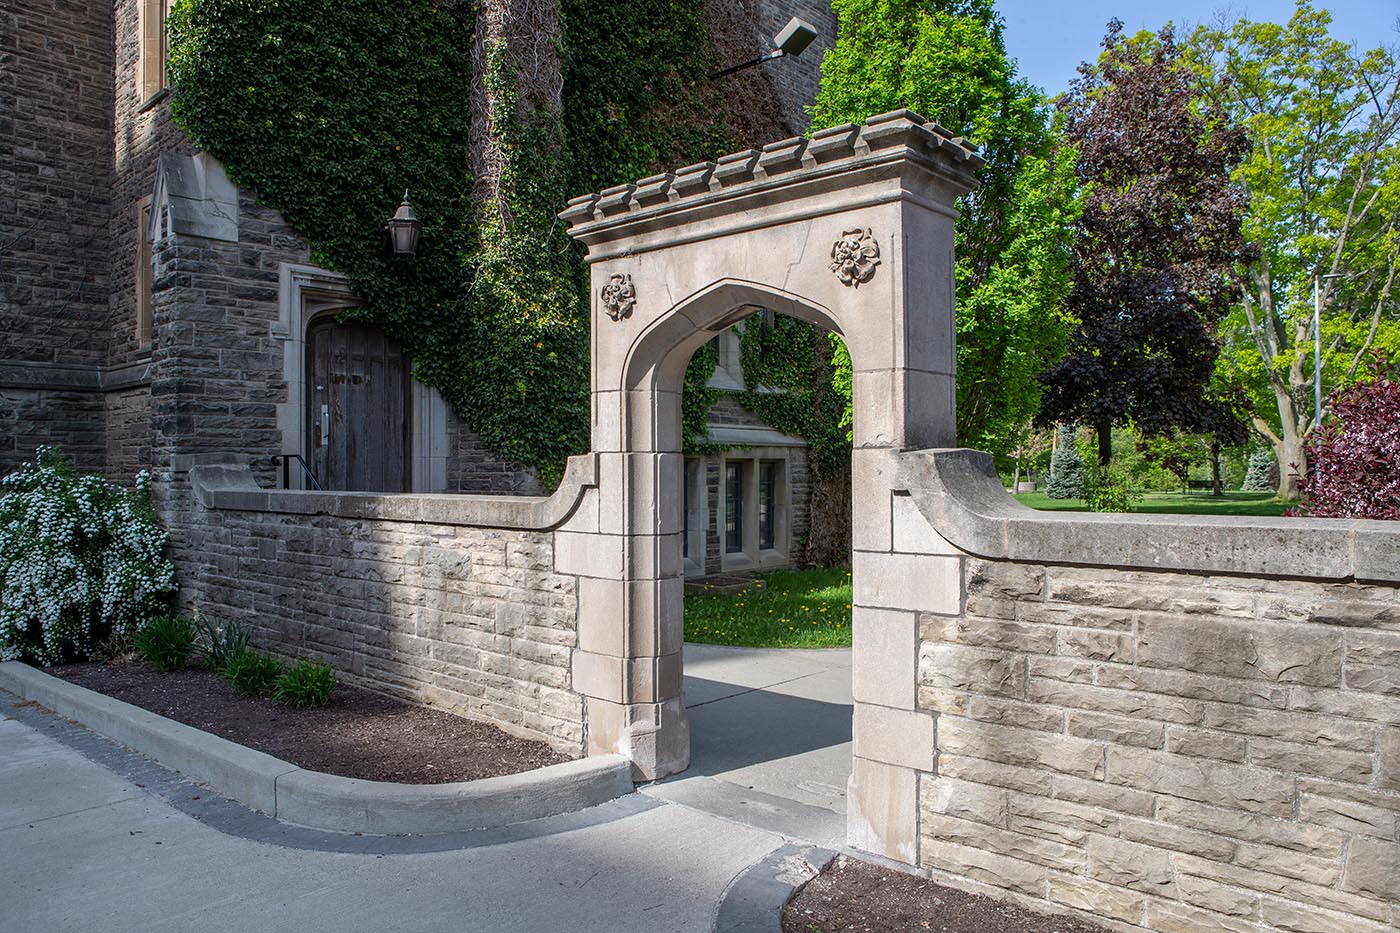 The sun shines on a stone archway in front of an old stone building on McMaster's campus.